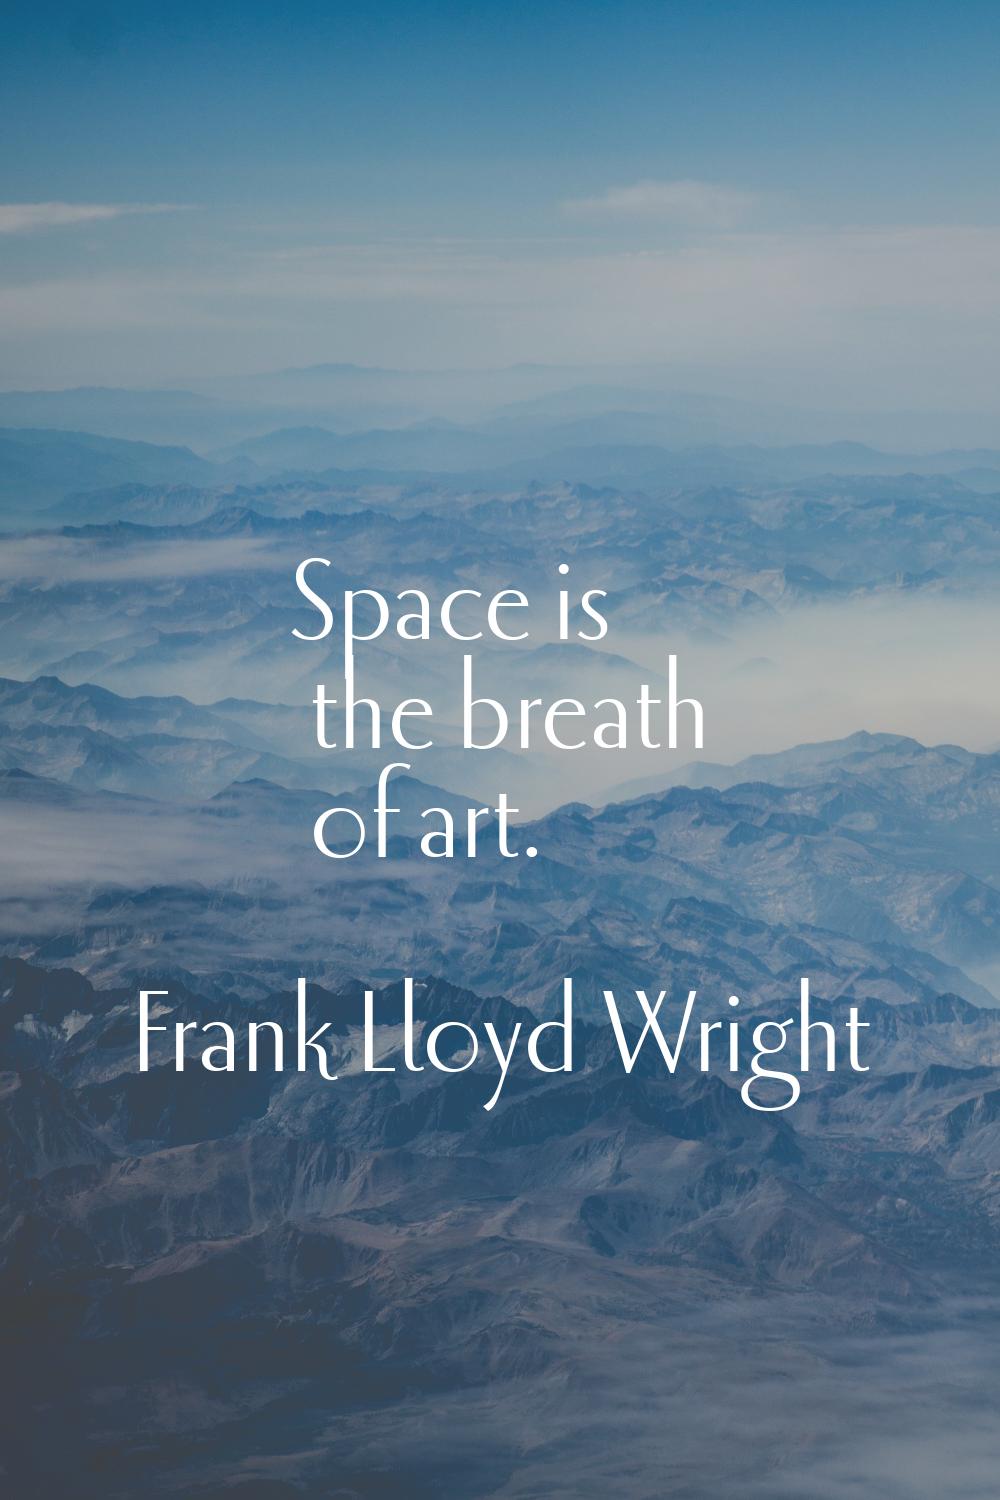 Space is the breath of art.